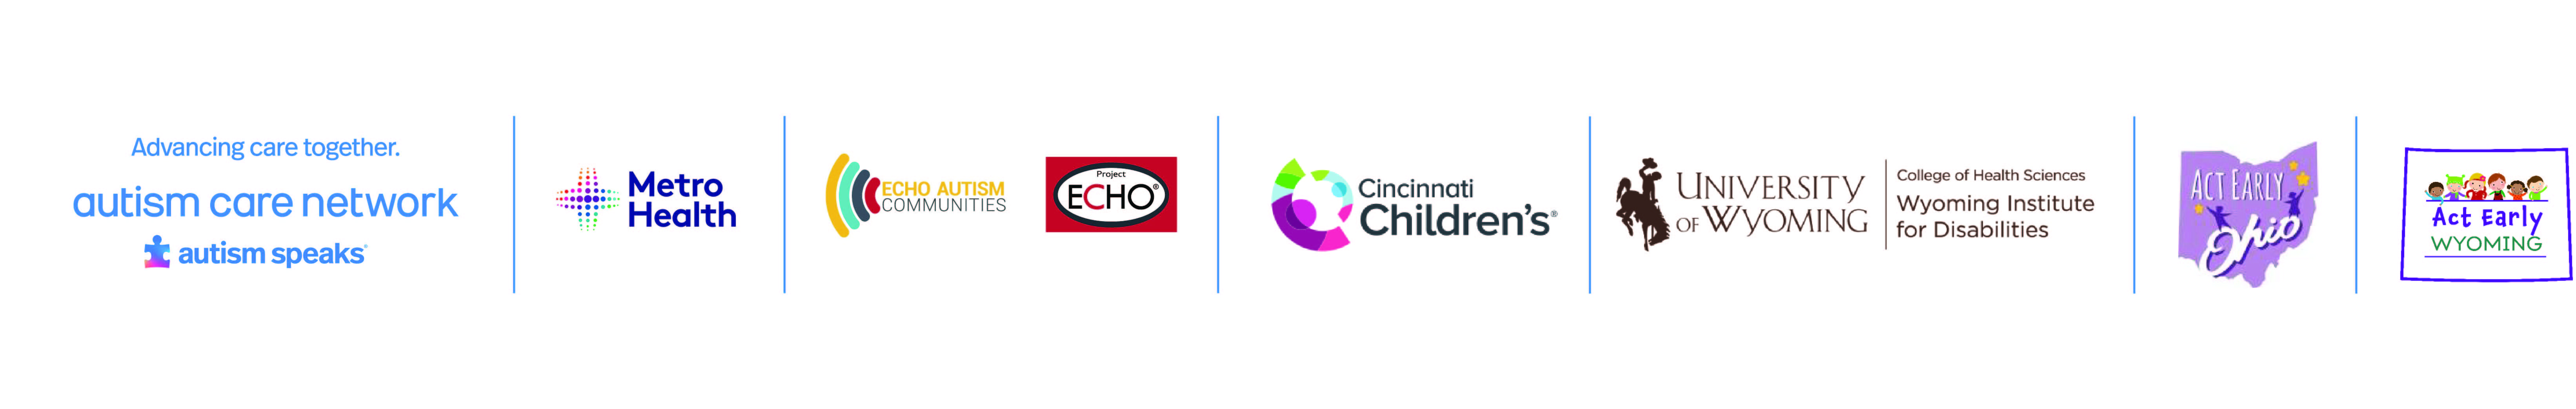 Logos for Autism Care Network, MetroHealth, ECHO Autism Communities, Cincinnati Chidren's Hospital Medical Center, Wyoming Institute for Disabilities, Act Early Ohio, Act Early Wyoming